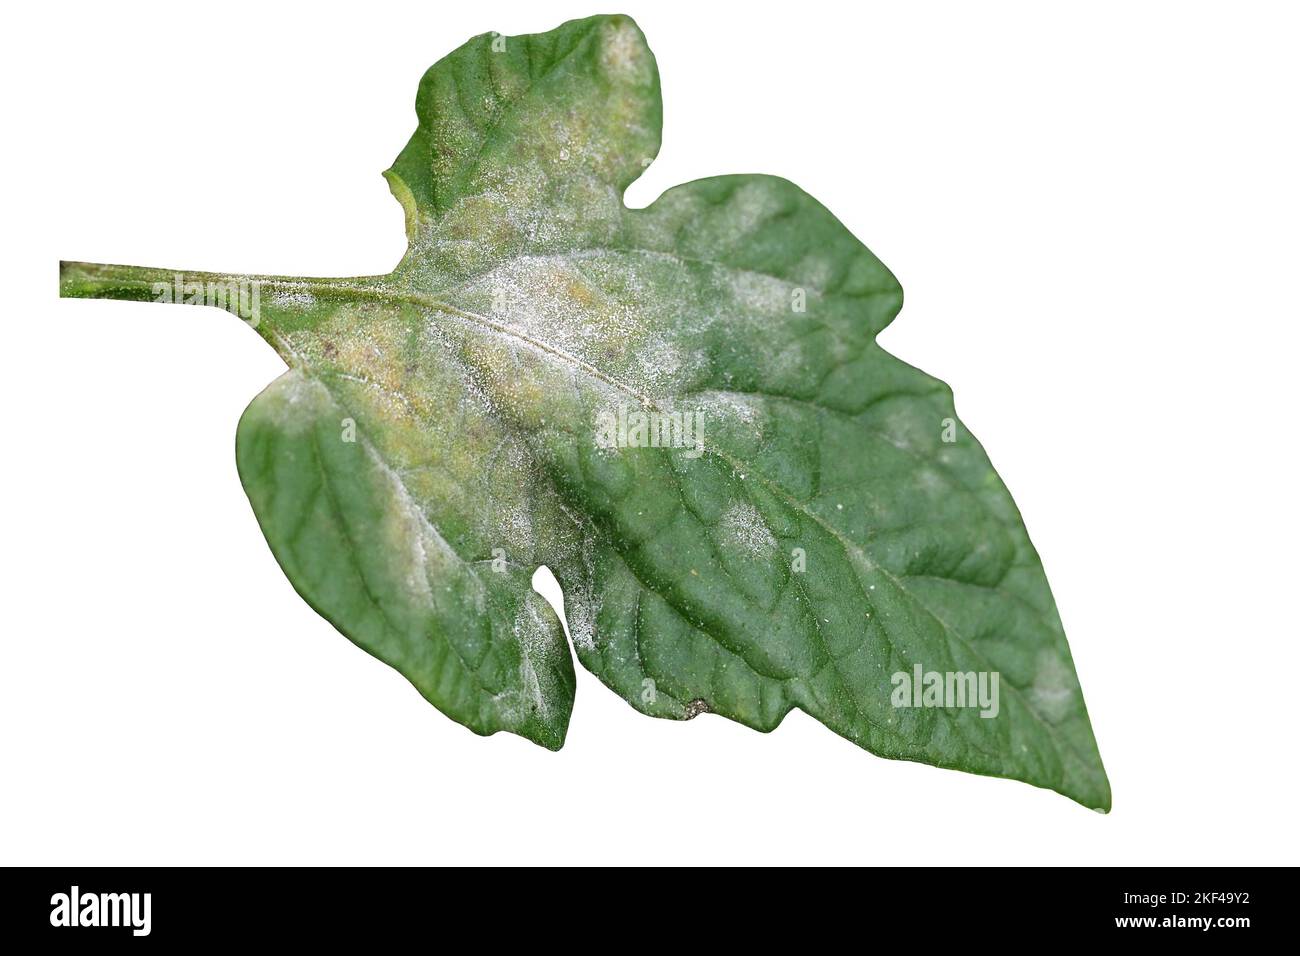 Fungal plant disease Powdery Mildew on a tomato leaf. White plaque on the leaf. Infected plant displays white powdery spots on the leaf. Close up. Stock Photo